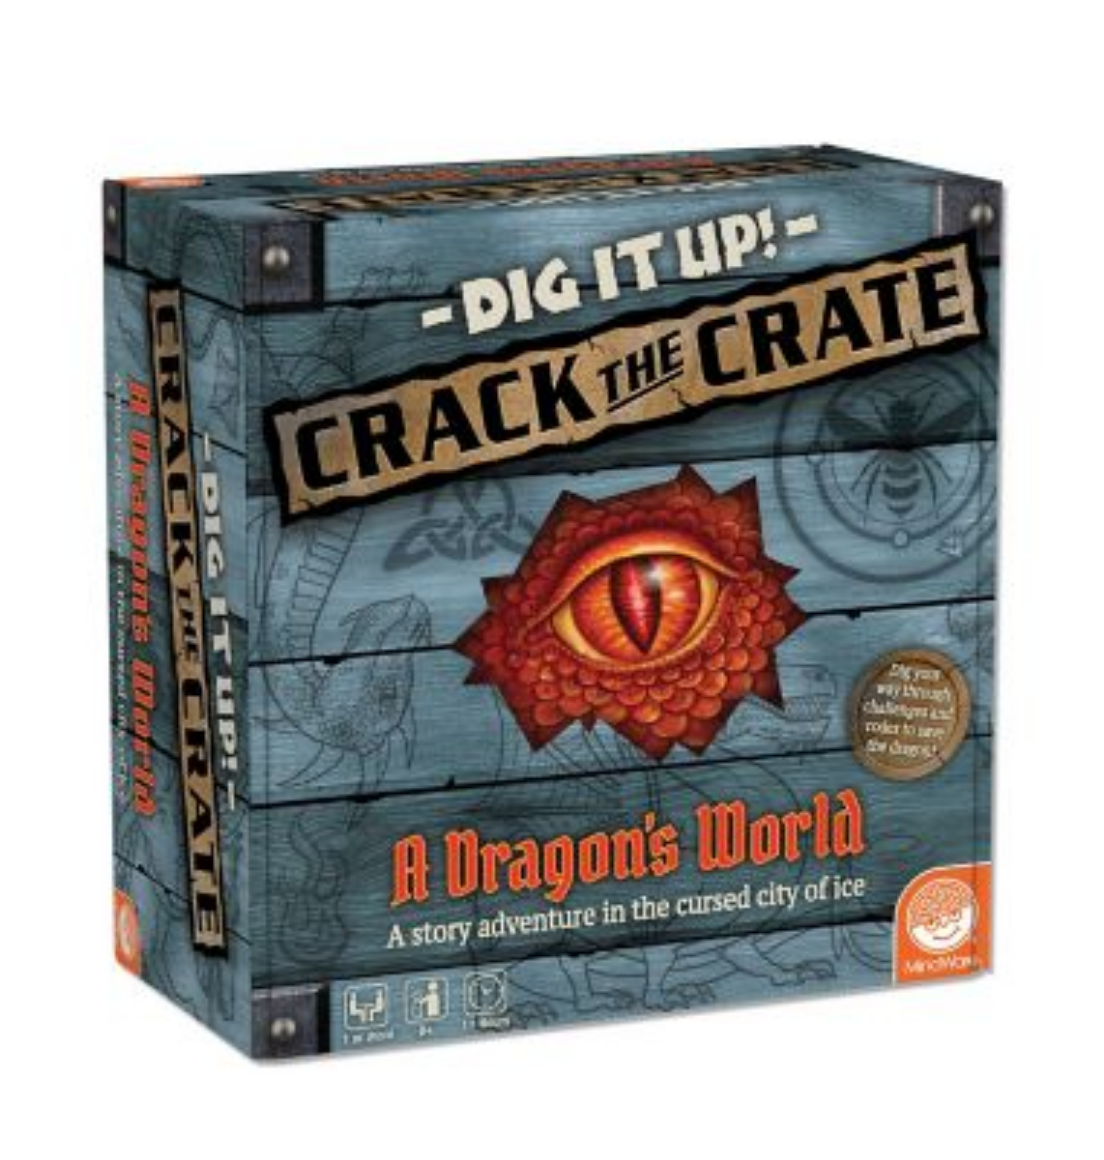 Dig It Up! Crack The Crate